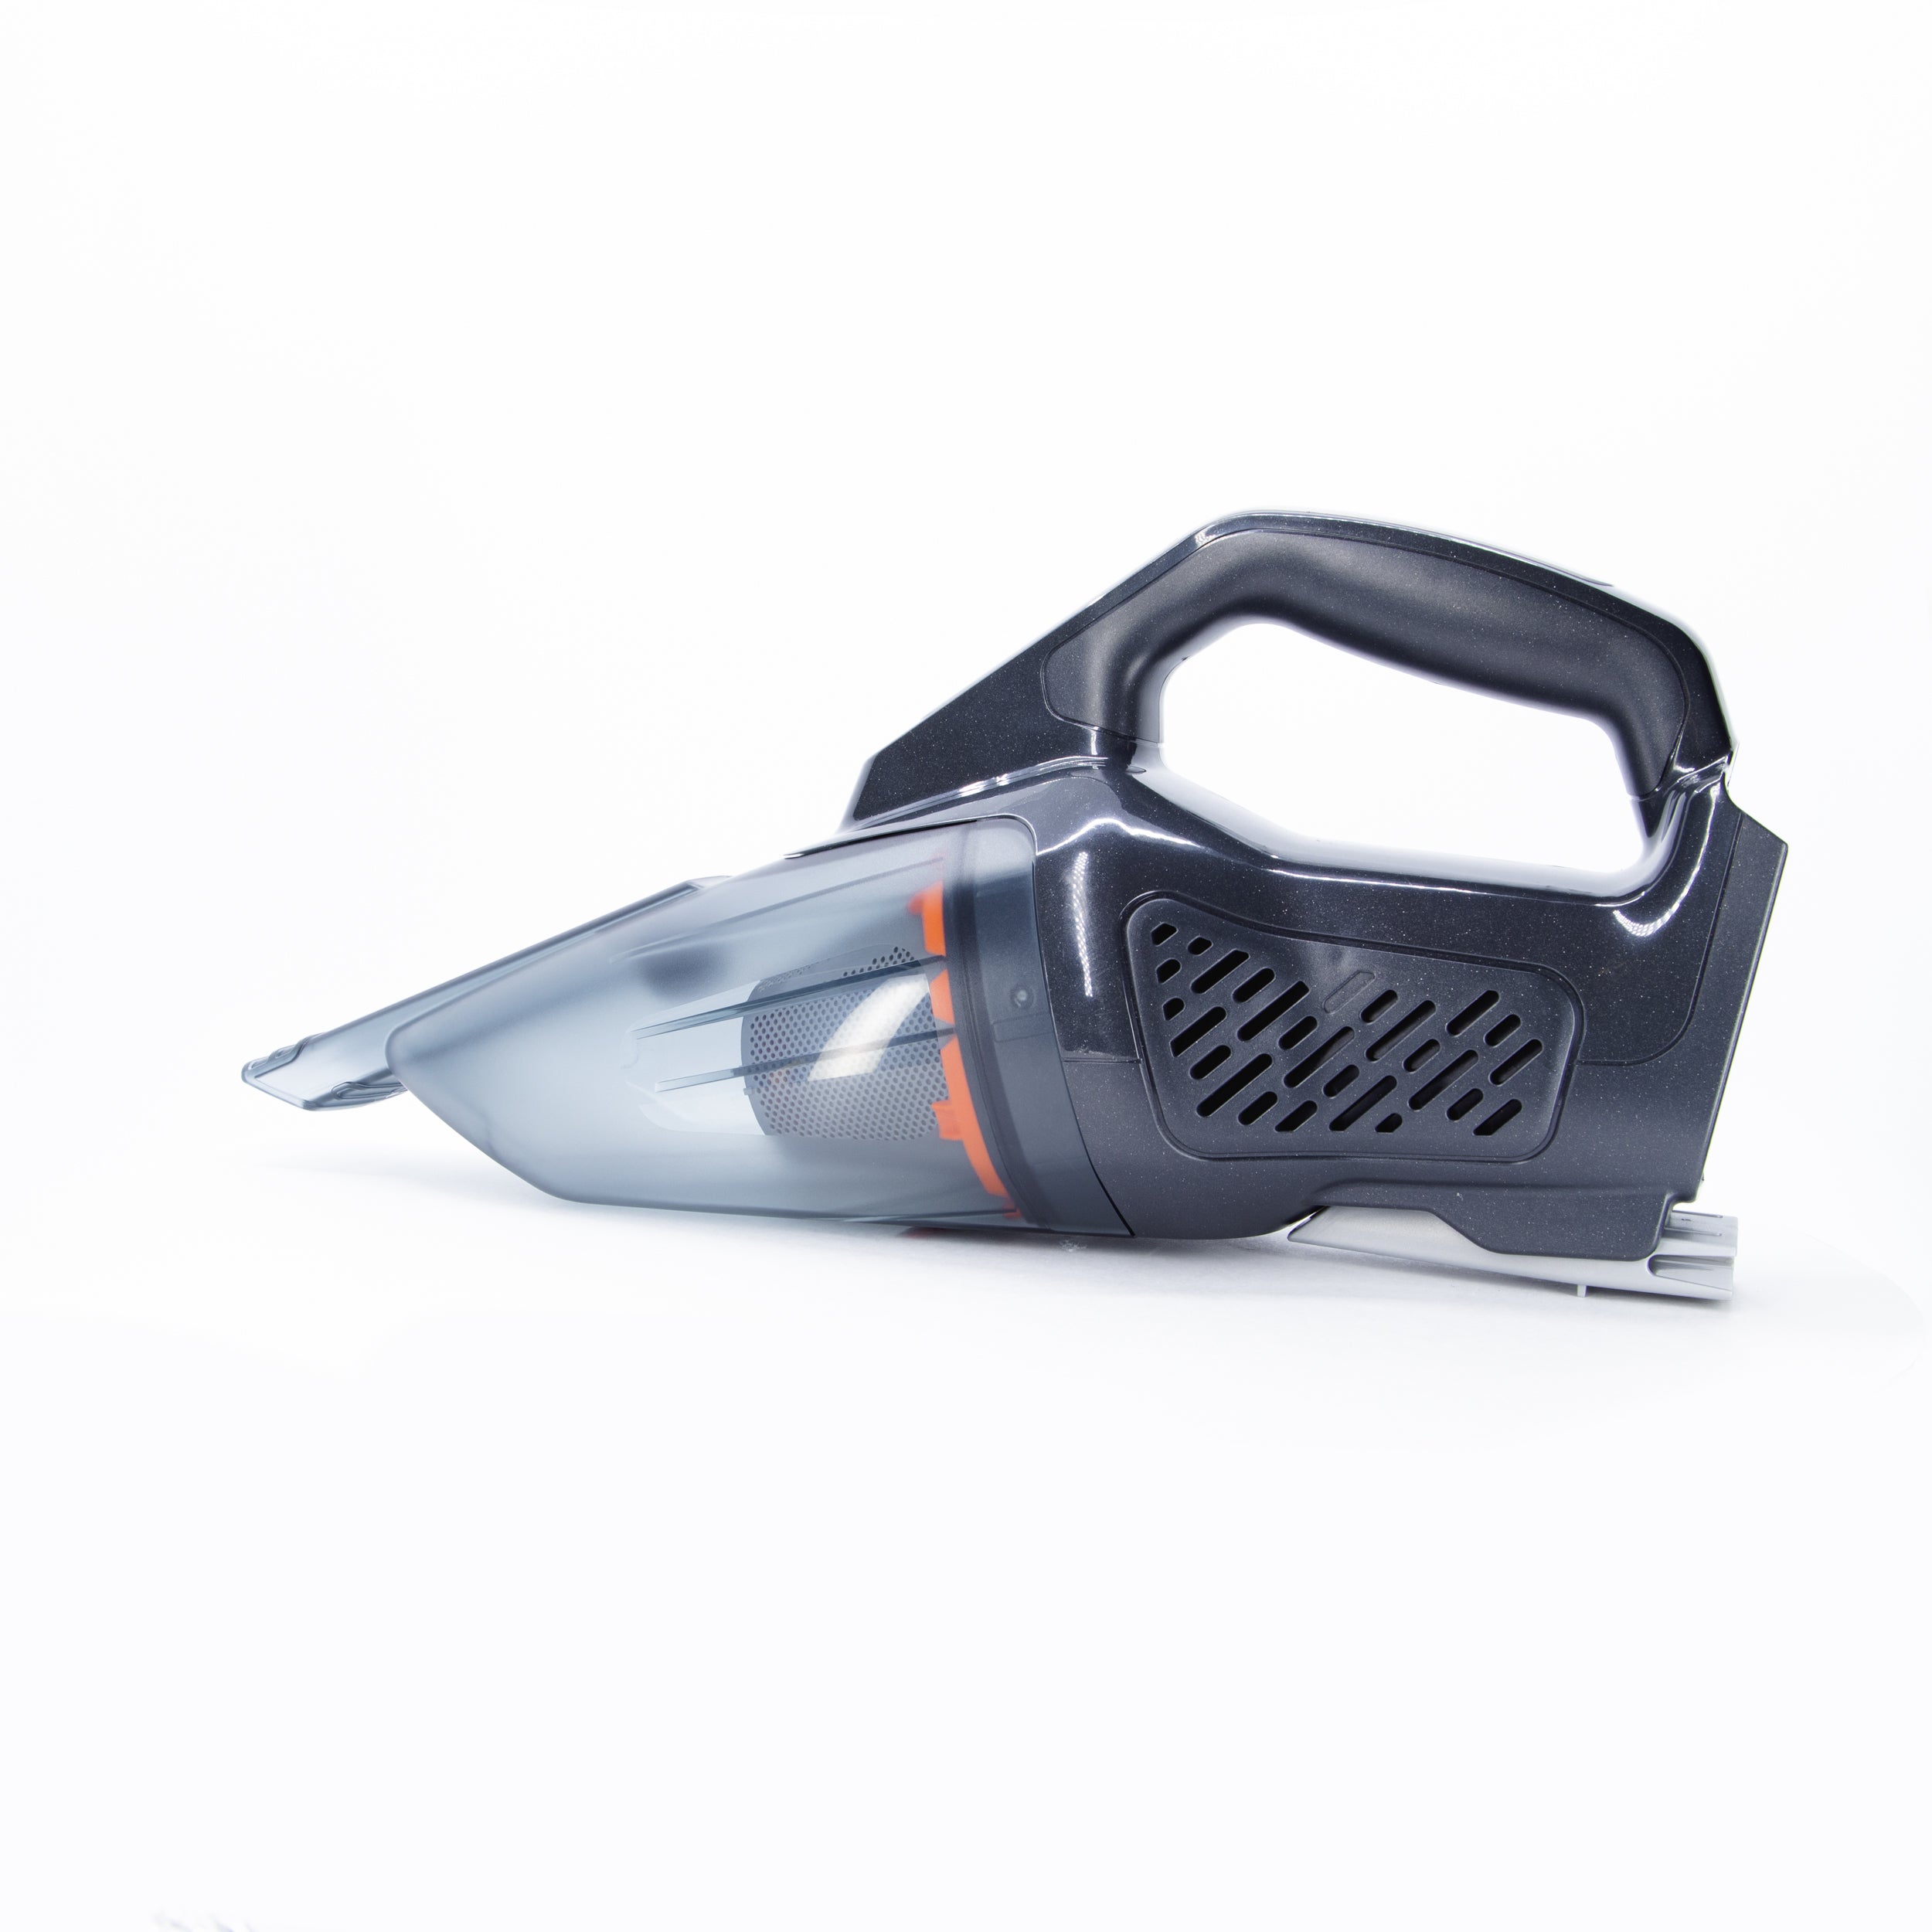 Dustbuster 20V Max* Powerconnect Cordless Handheld Vacuum (Tool Only)